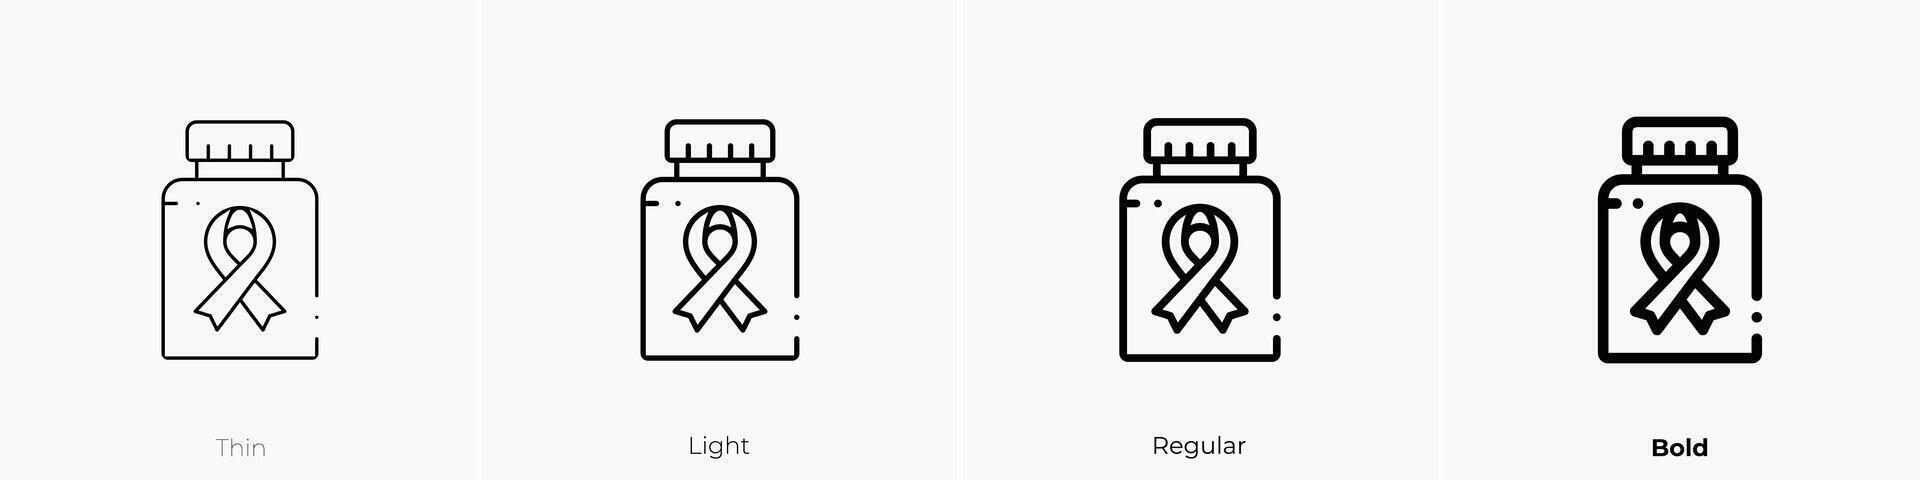 medicine icon. Thin, Light, Regular And Bold style design isolated on white background vector